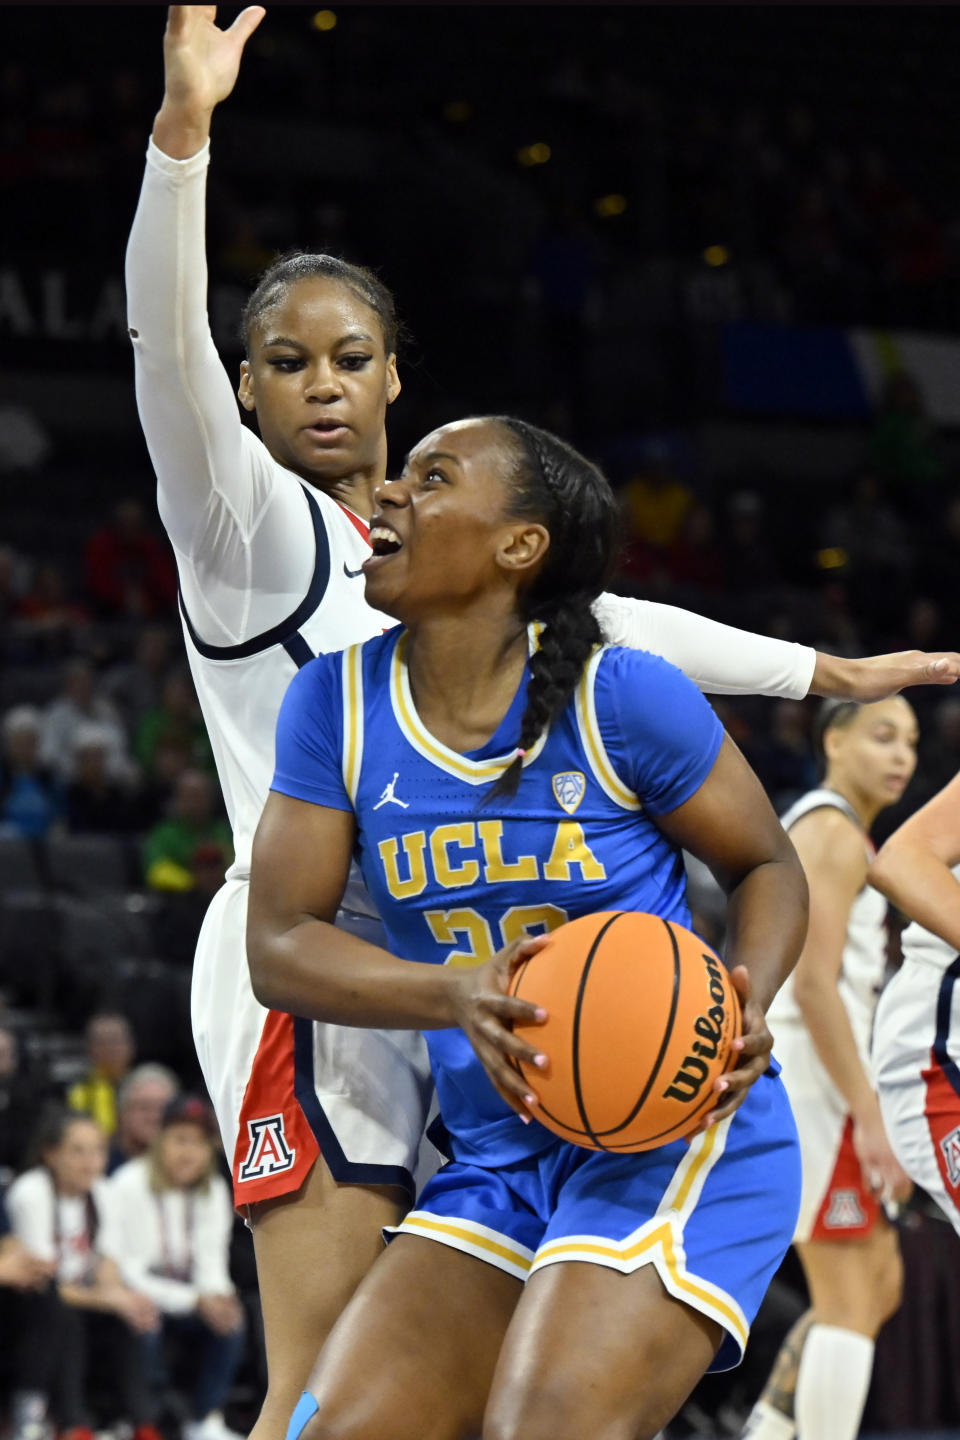 UCLA guard Charisma Osborne (20) looks to shoot against Arizona guard Lauren Fields, top, during the first half of an NCAA college basketball game in the quarterfinal round of the Pac-12 women's tournament Thursday, March 2, 2023, in Las Vegas. (AP Photo/David Becker)